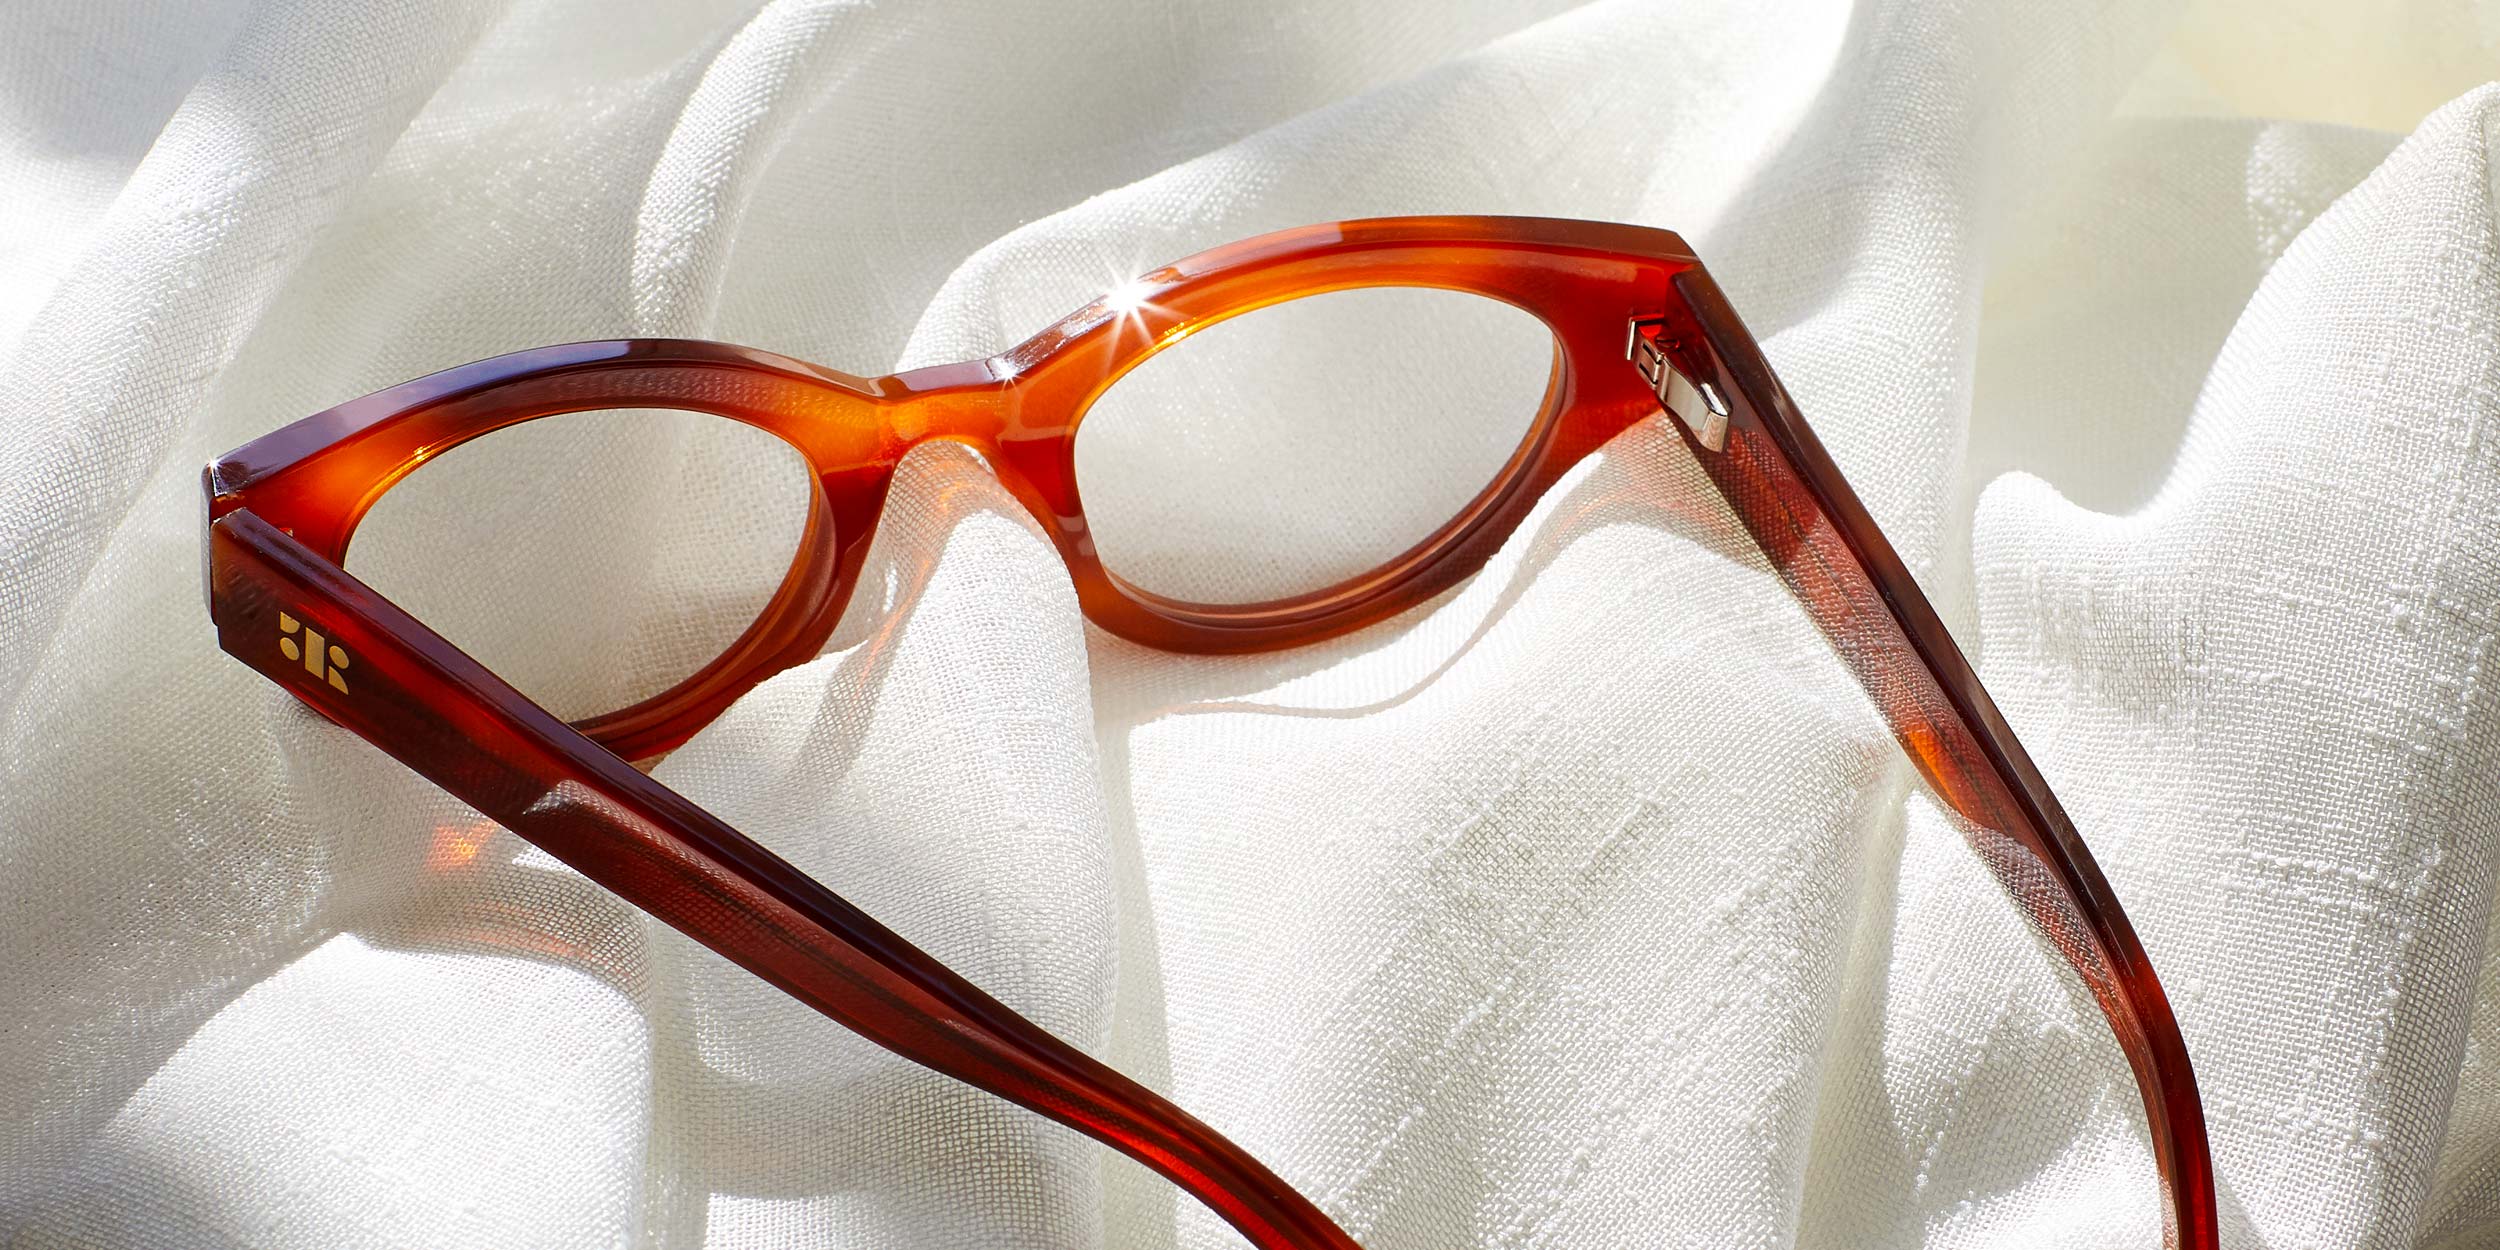 Photo Details of Camille Cognac Reading Glasses in a room